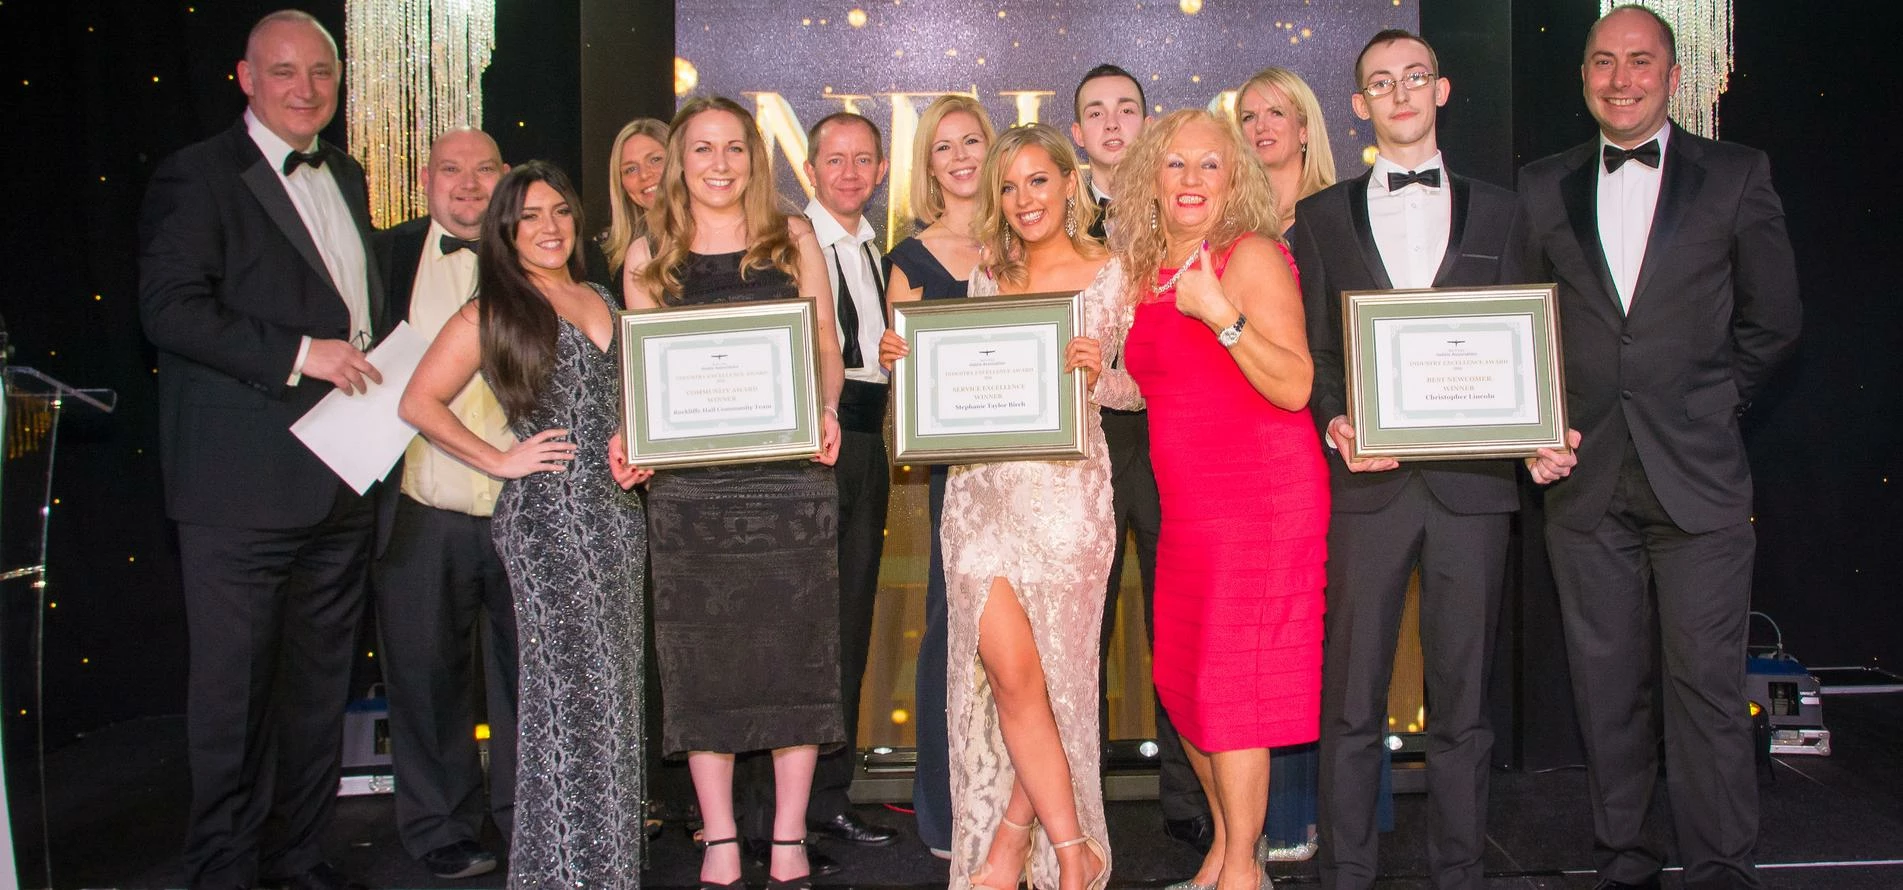 The 2016 North East Hotel Association Excellence Award Winners